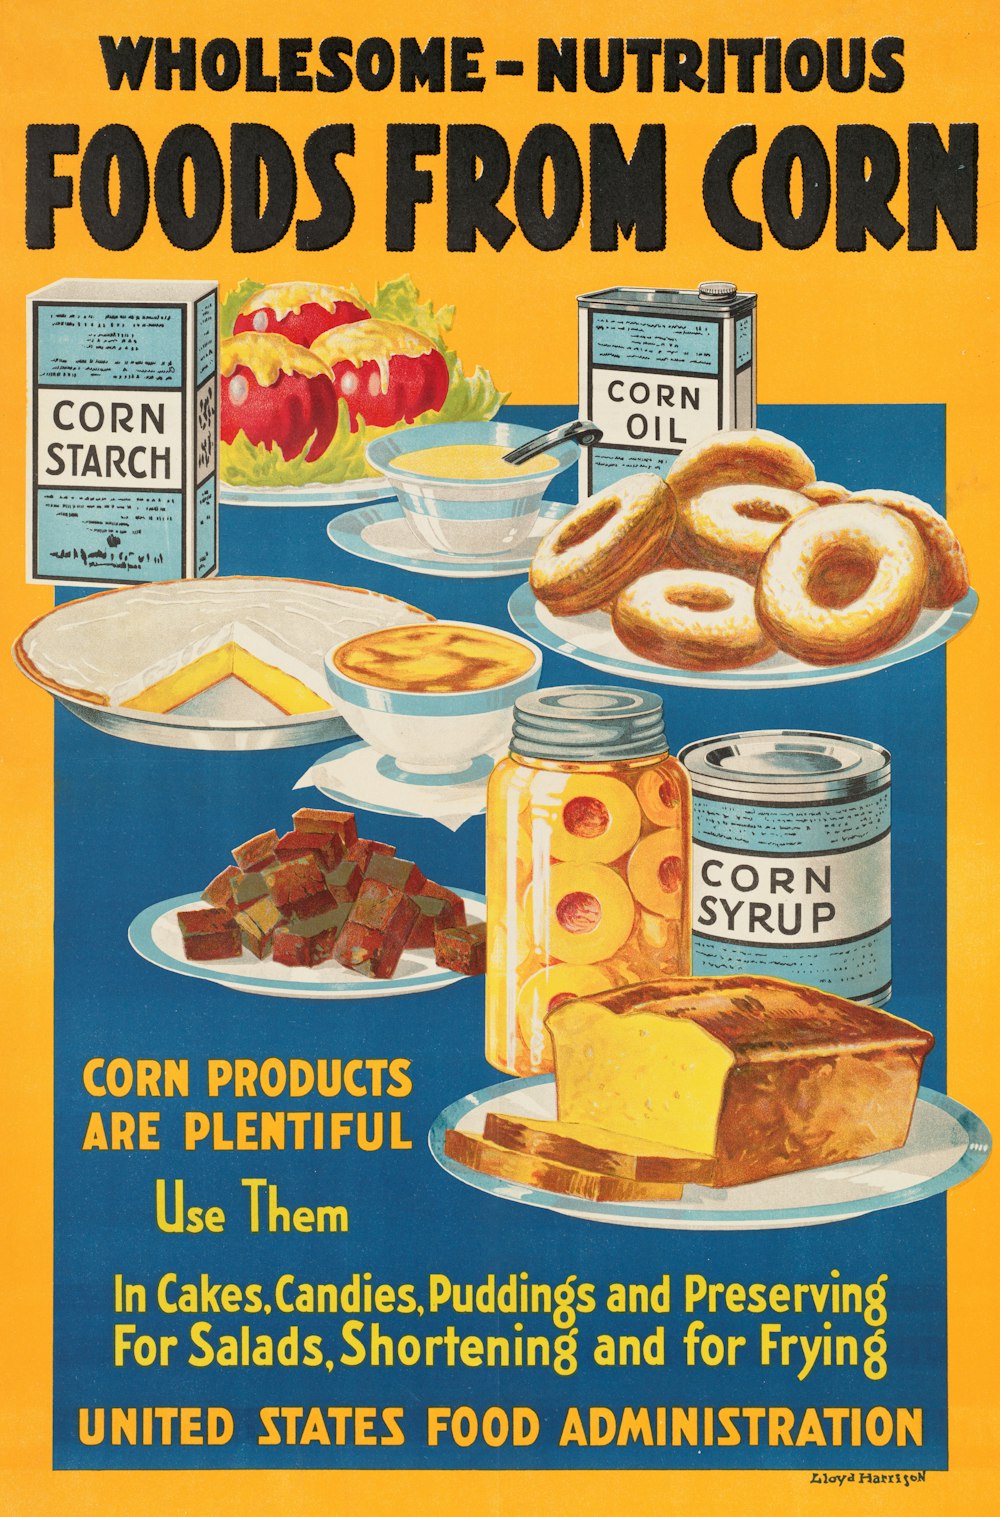 a poster advertising corn and other foods from corn